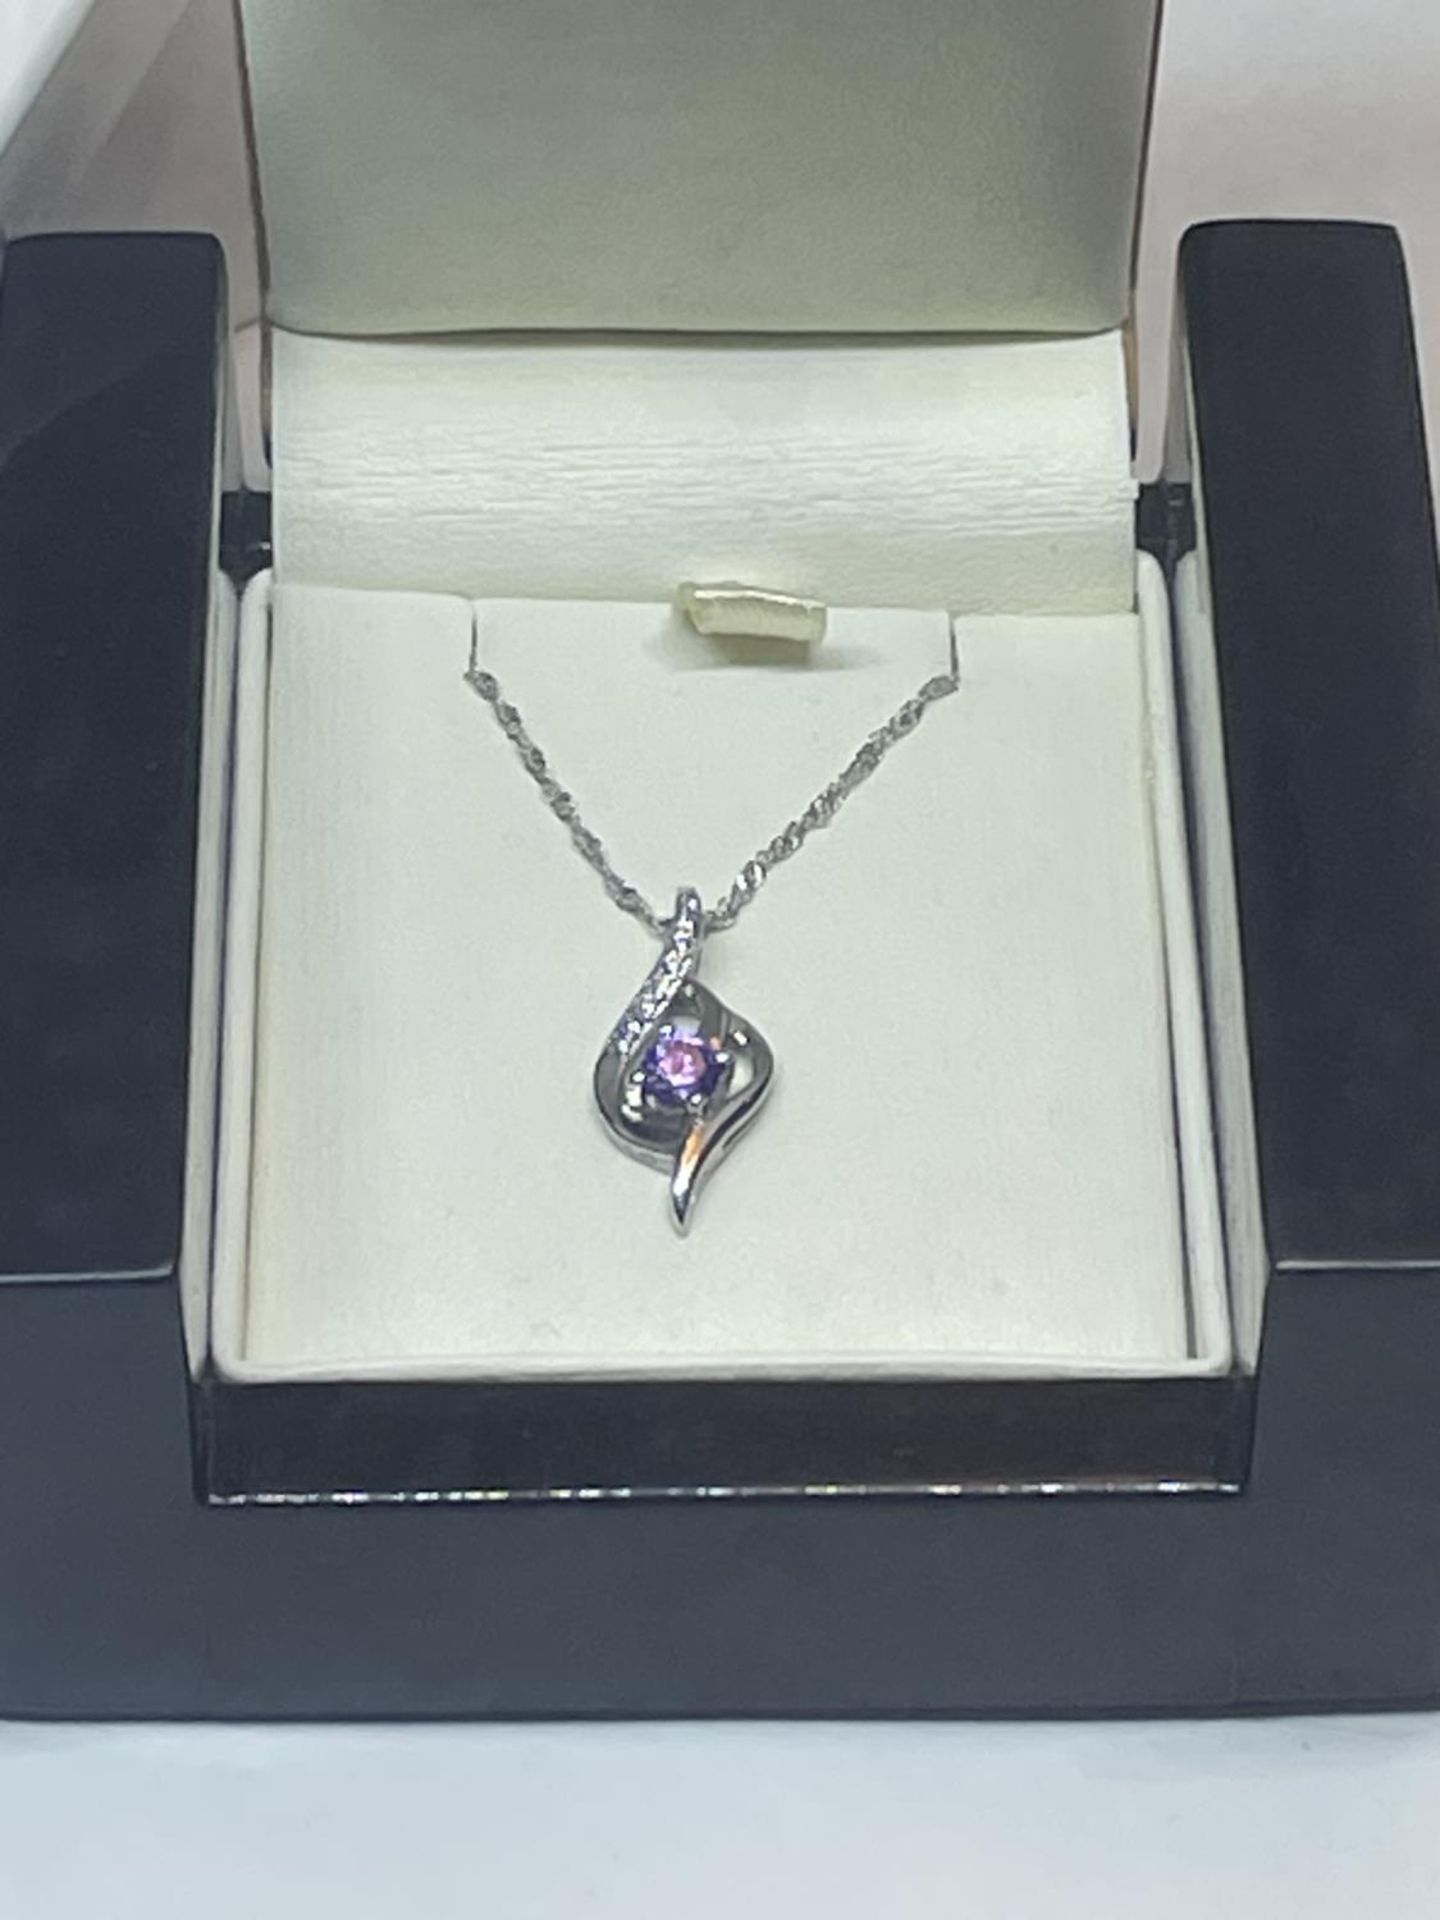 A SILVER NECKLACE IN A PRESENTATION BOX - Image 2 of 3